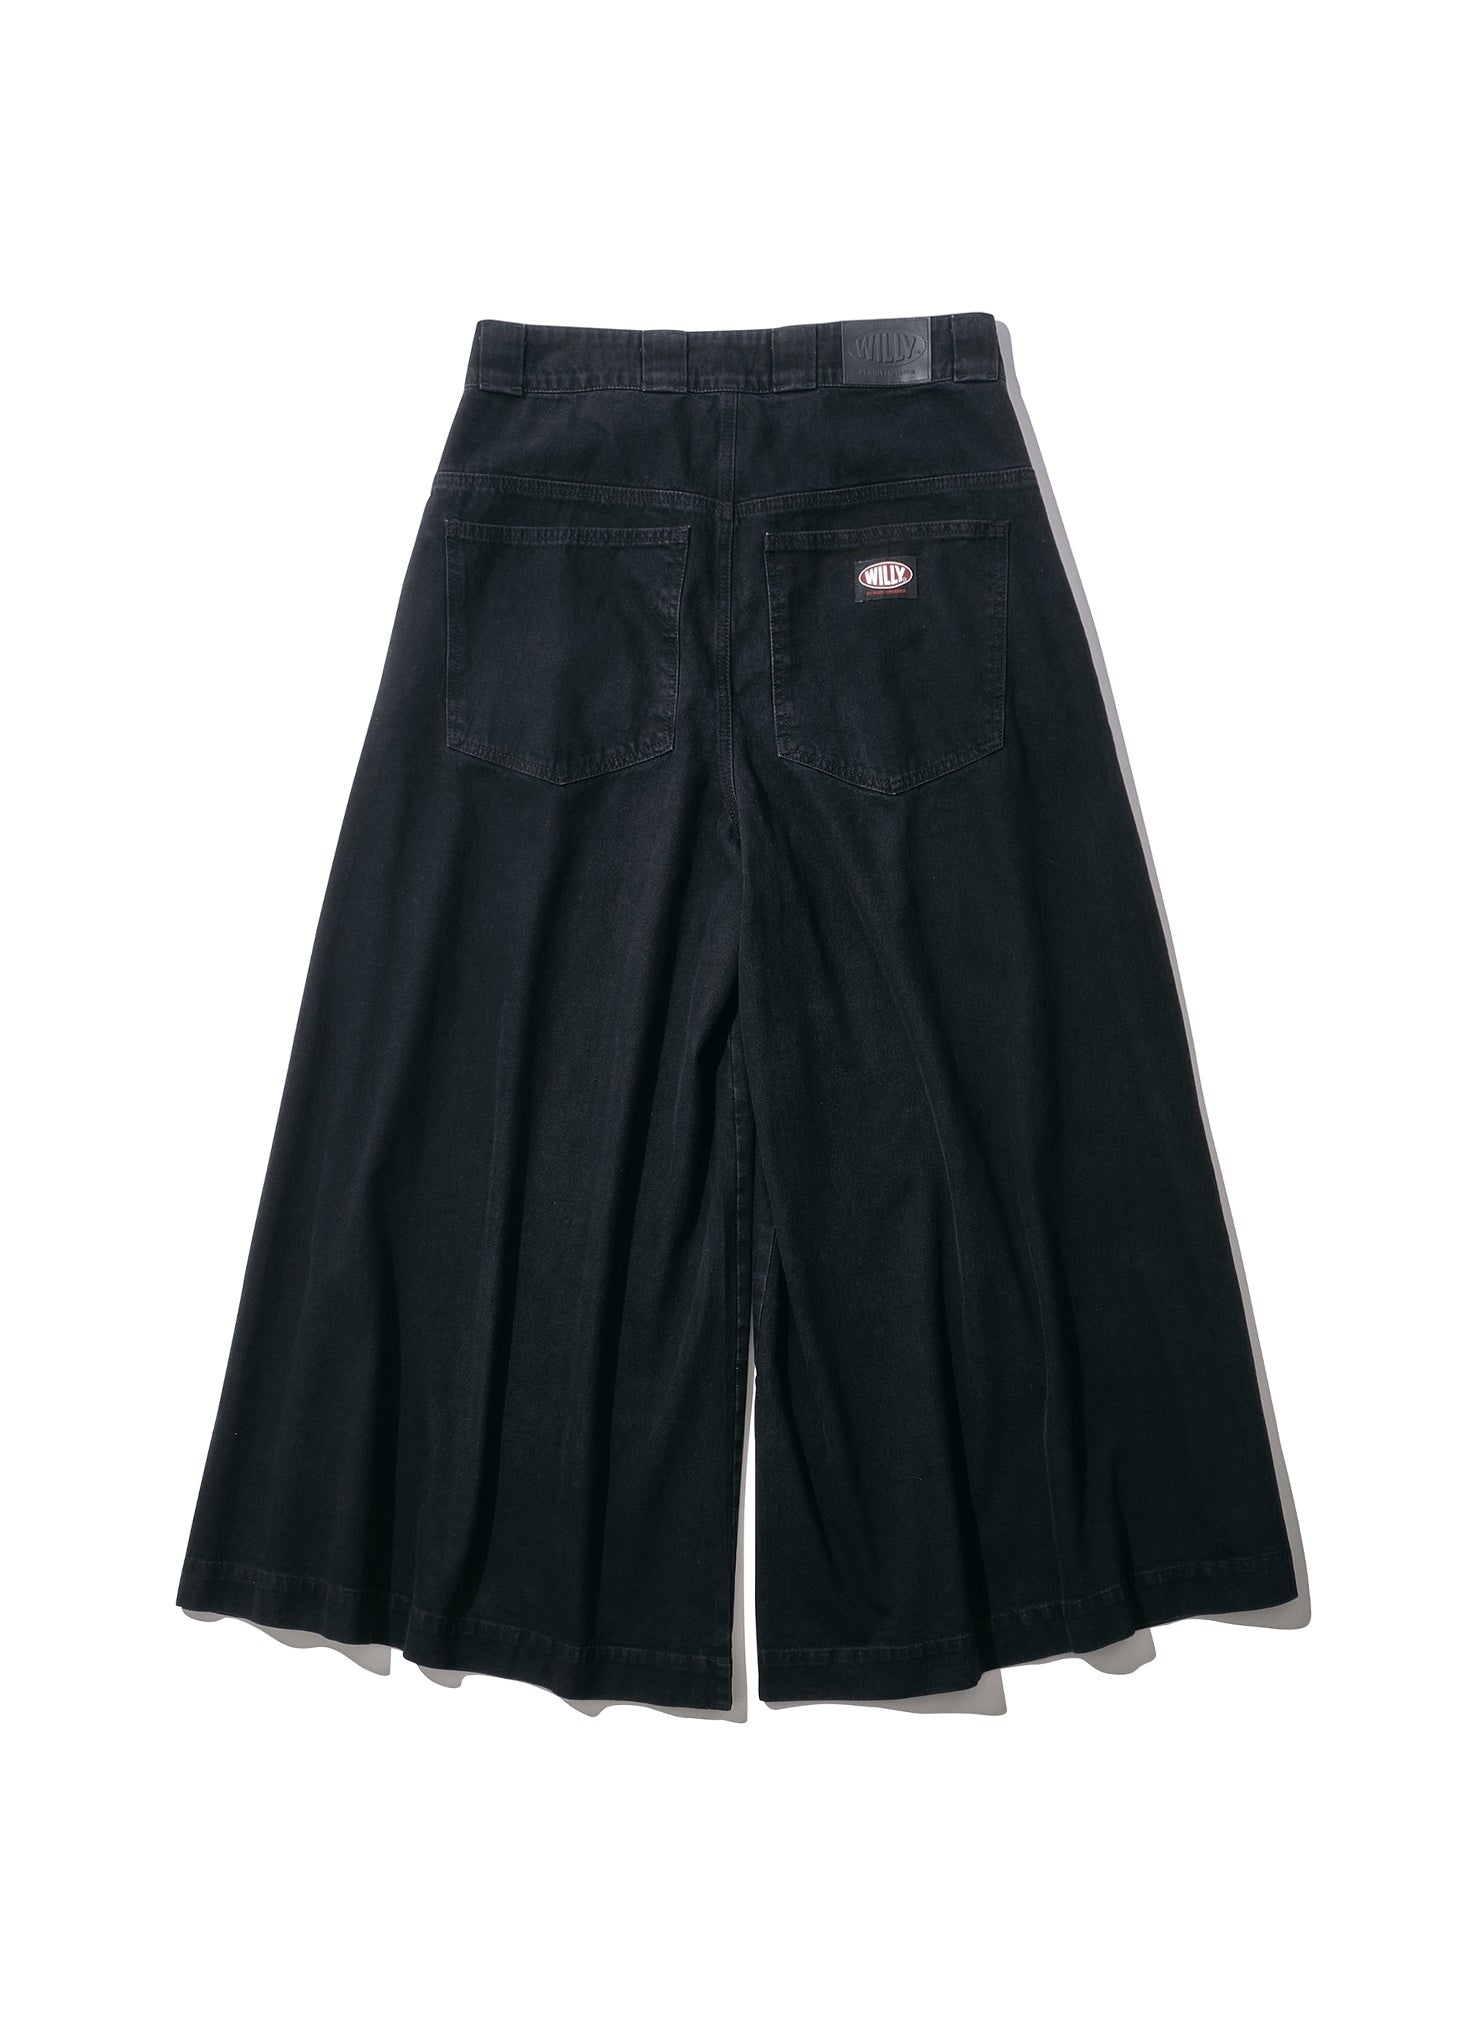 WILLY CHAVARRIA / GHOST RIDER PANT WASHED BLACK